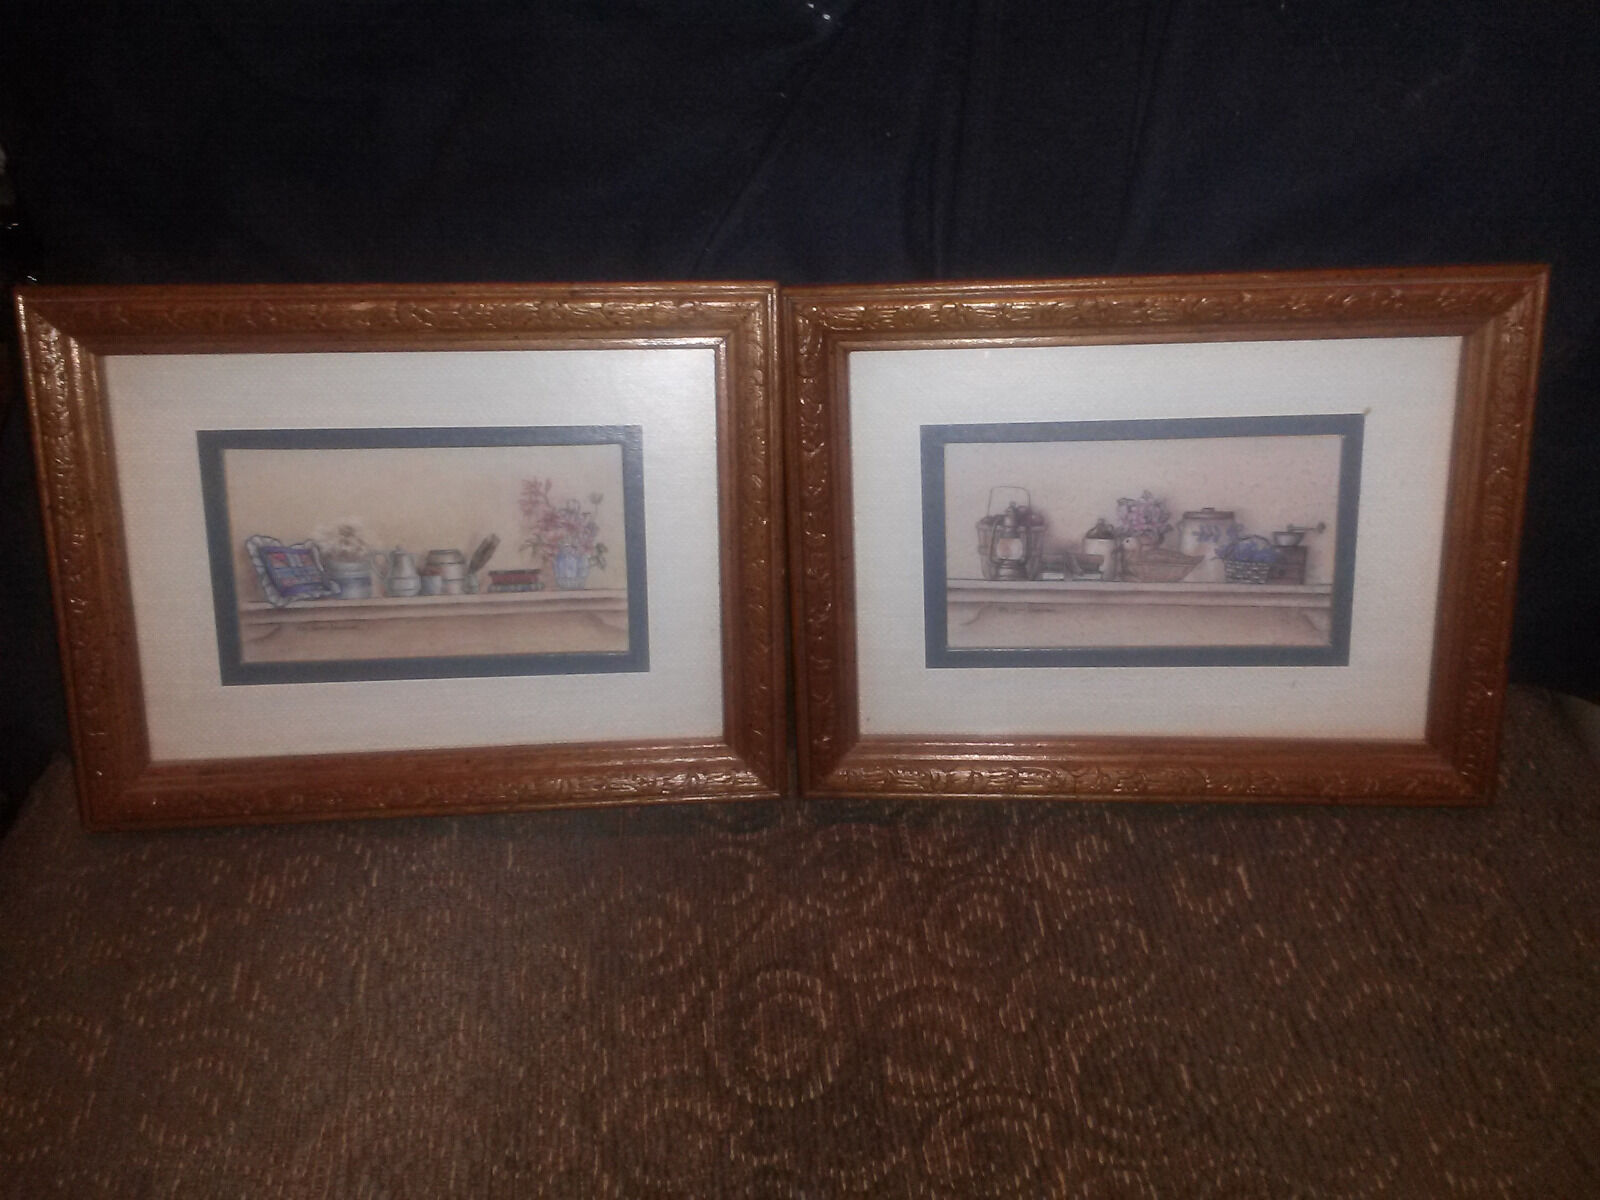 SET OF 2 PRINTS DEPICTING ITEMS ON SHELVES SIGNED BY ARTIST APPROX. 8\